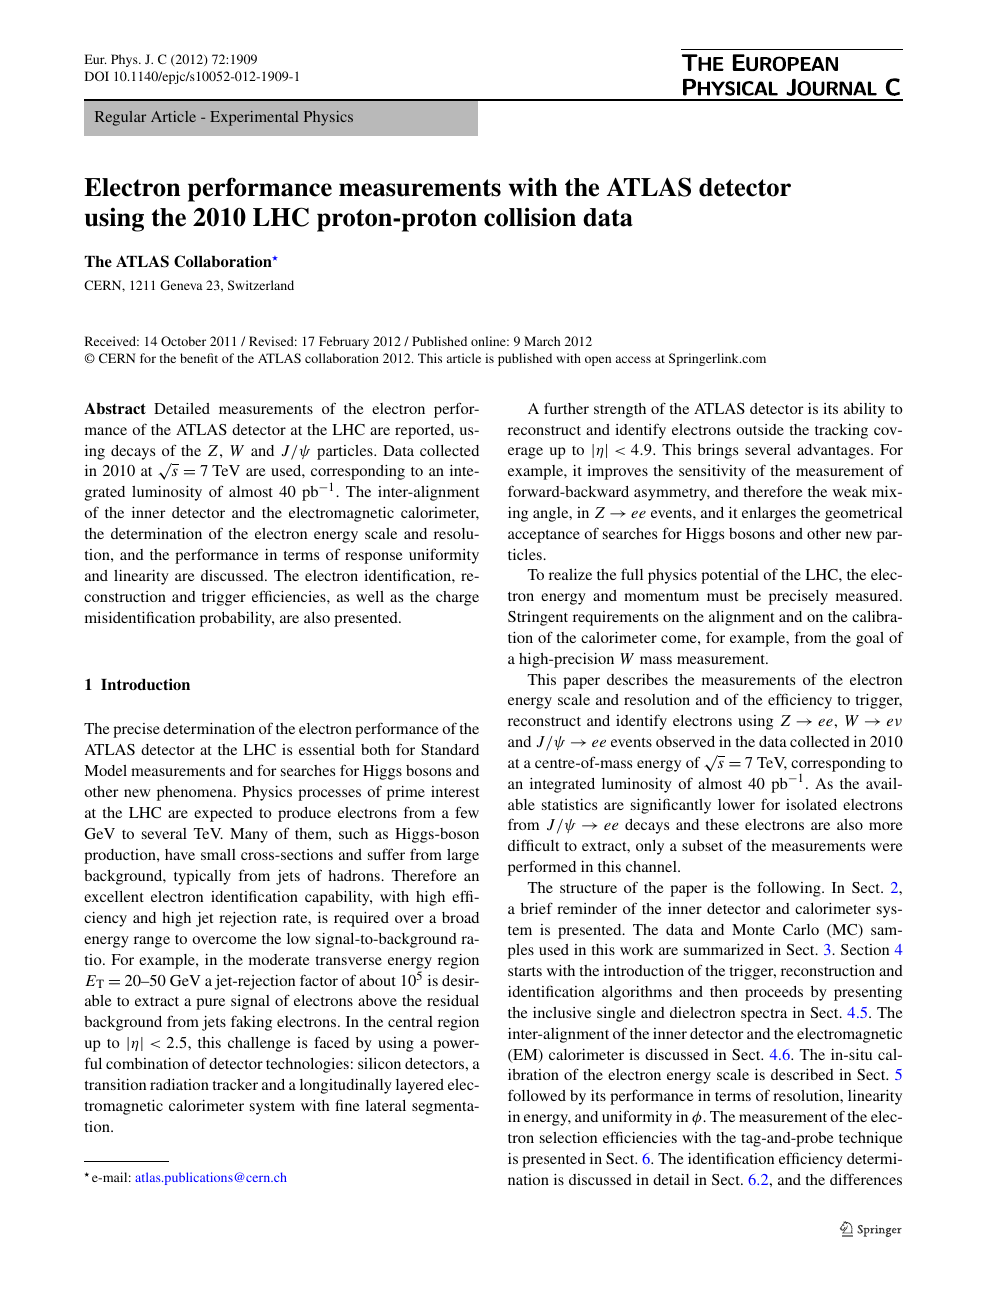 Electron Performance Measurements With The Atlas Detector Using The 10 Lhc Proton Proton Collision Data Topic Of Research Paper In Physical Sciences Download Scholarly Article Pdf And Read For Free On Cyberleninka